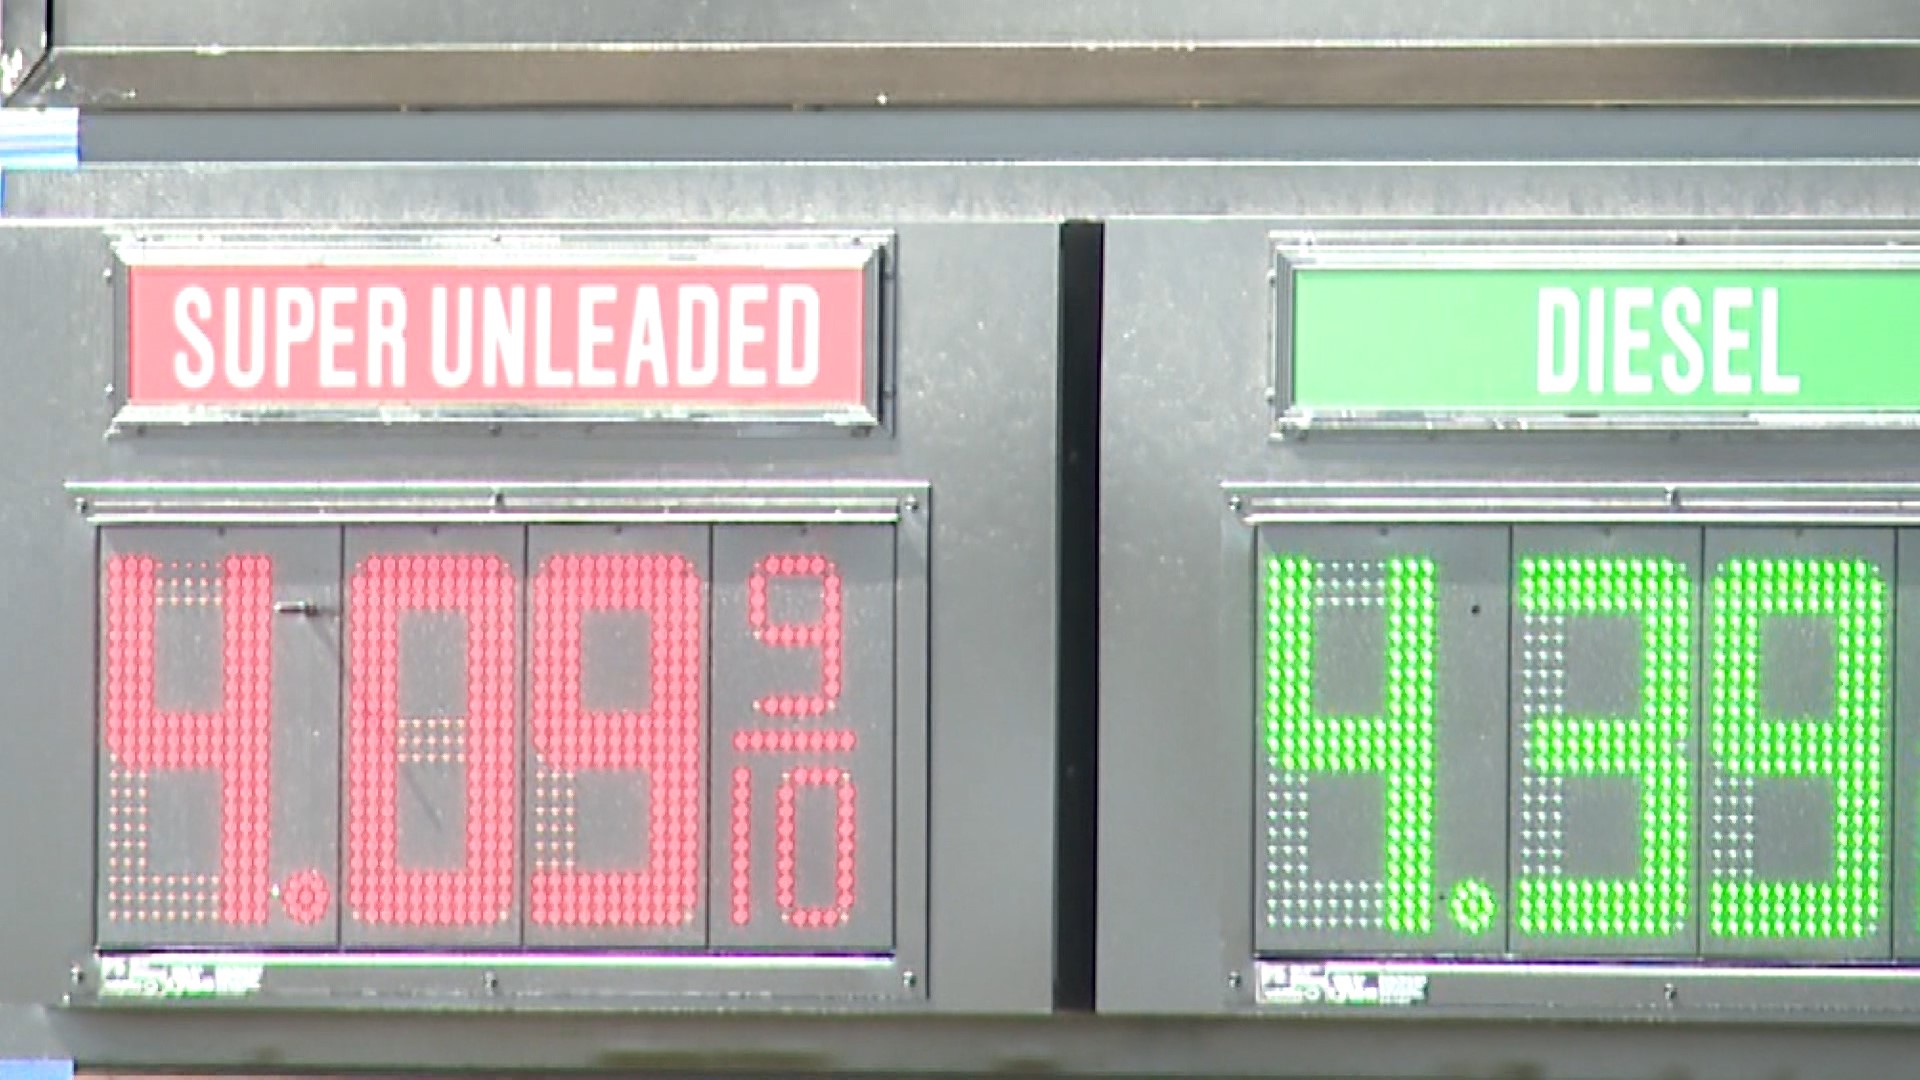 Why did gas prices go up so much?